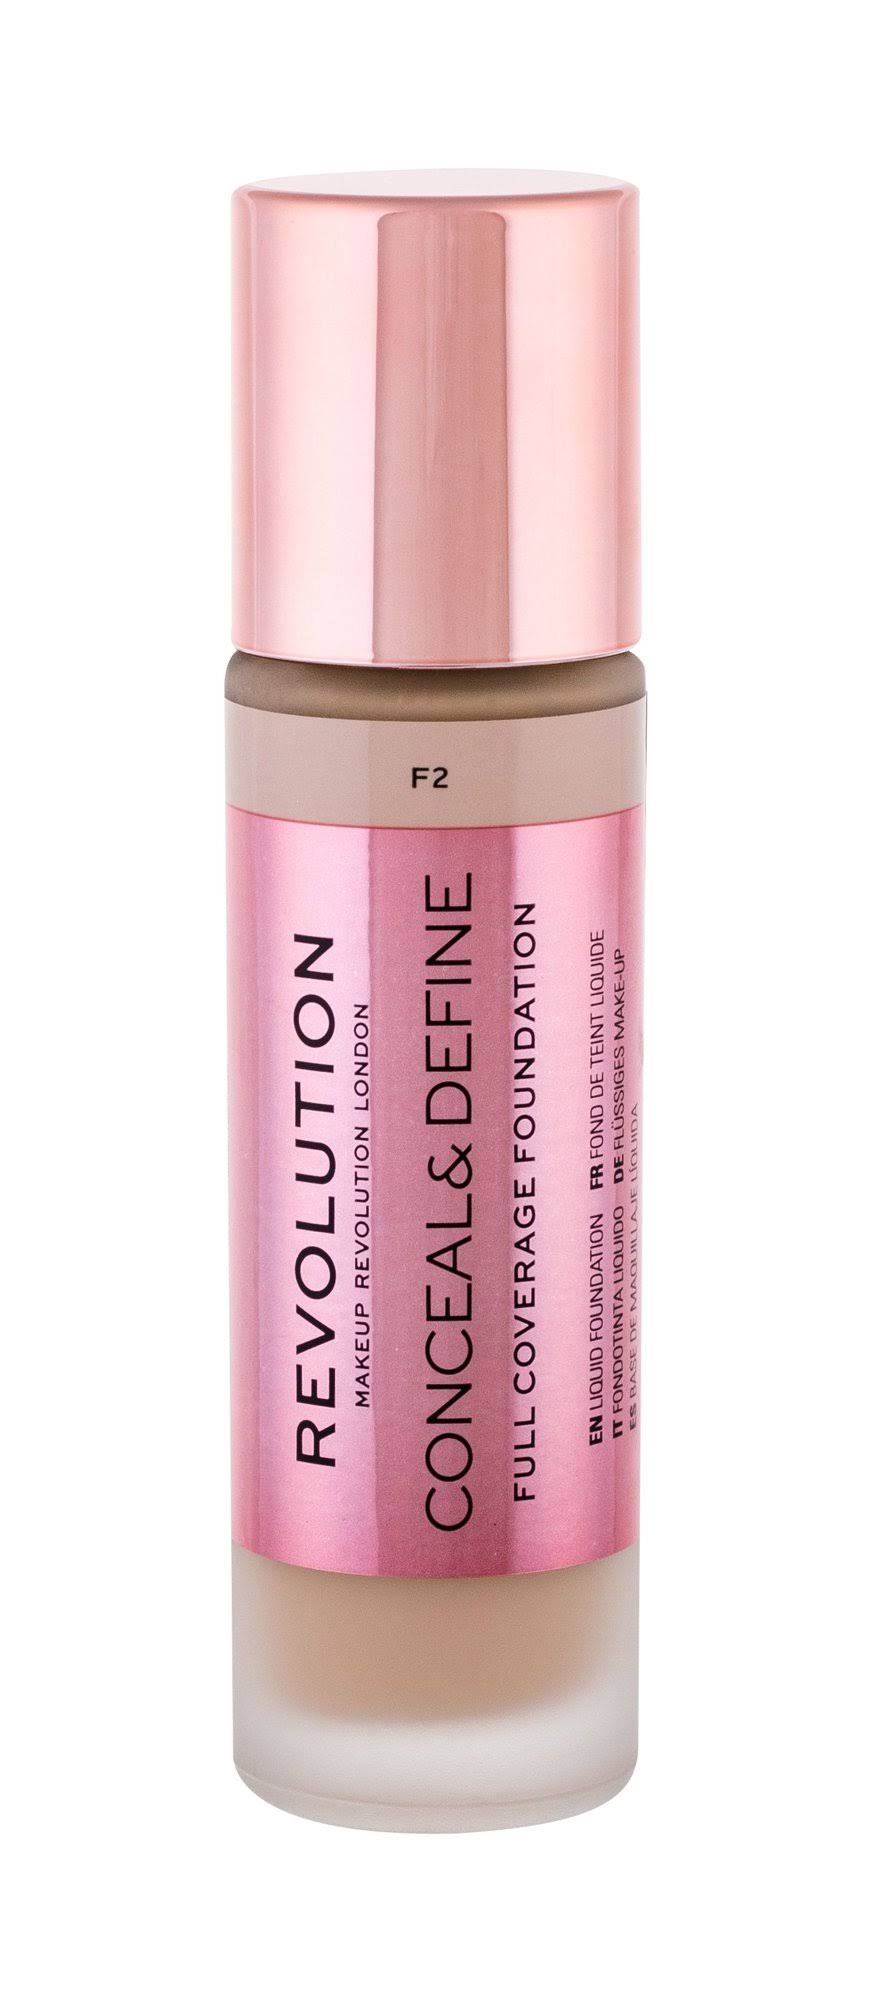 Makeup Revolution Conceal and Define Full Coverage Foundation